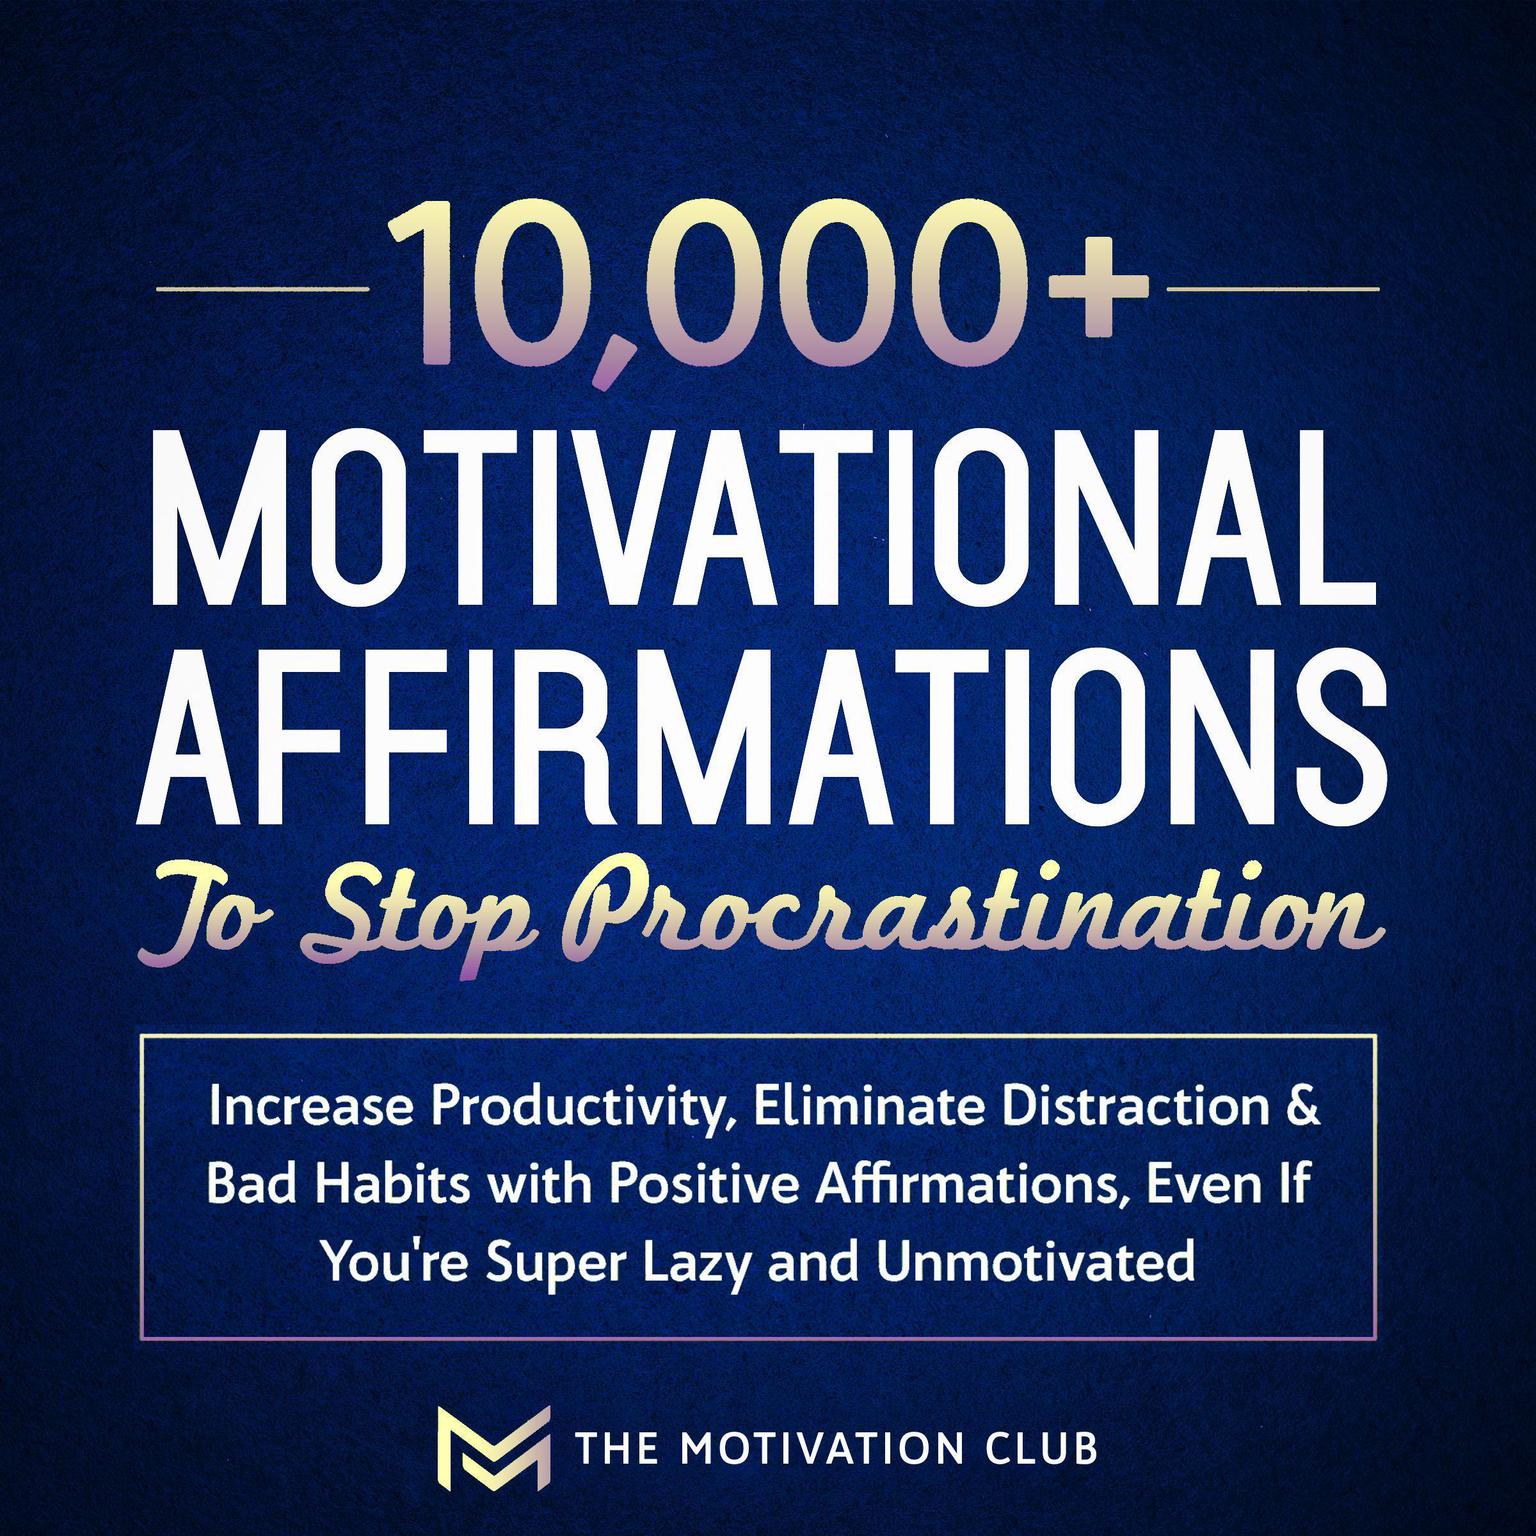 10,000+ Motivational Affirmations to Stop Procrastination and Increase Productivity: Eliminate Distraction & Bad Habits with Positive Affirmations, Even If You’re Super Lazy and Unmotivated Audiobook, by The Motivation Club